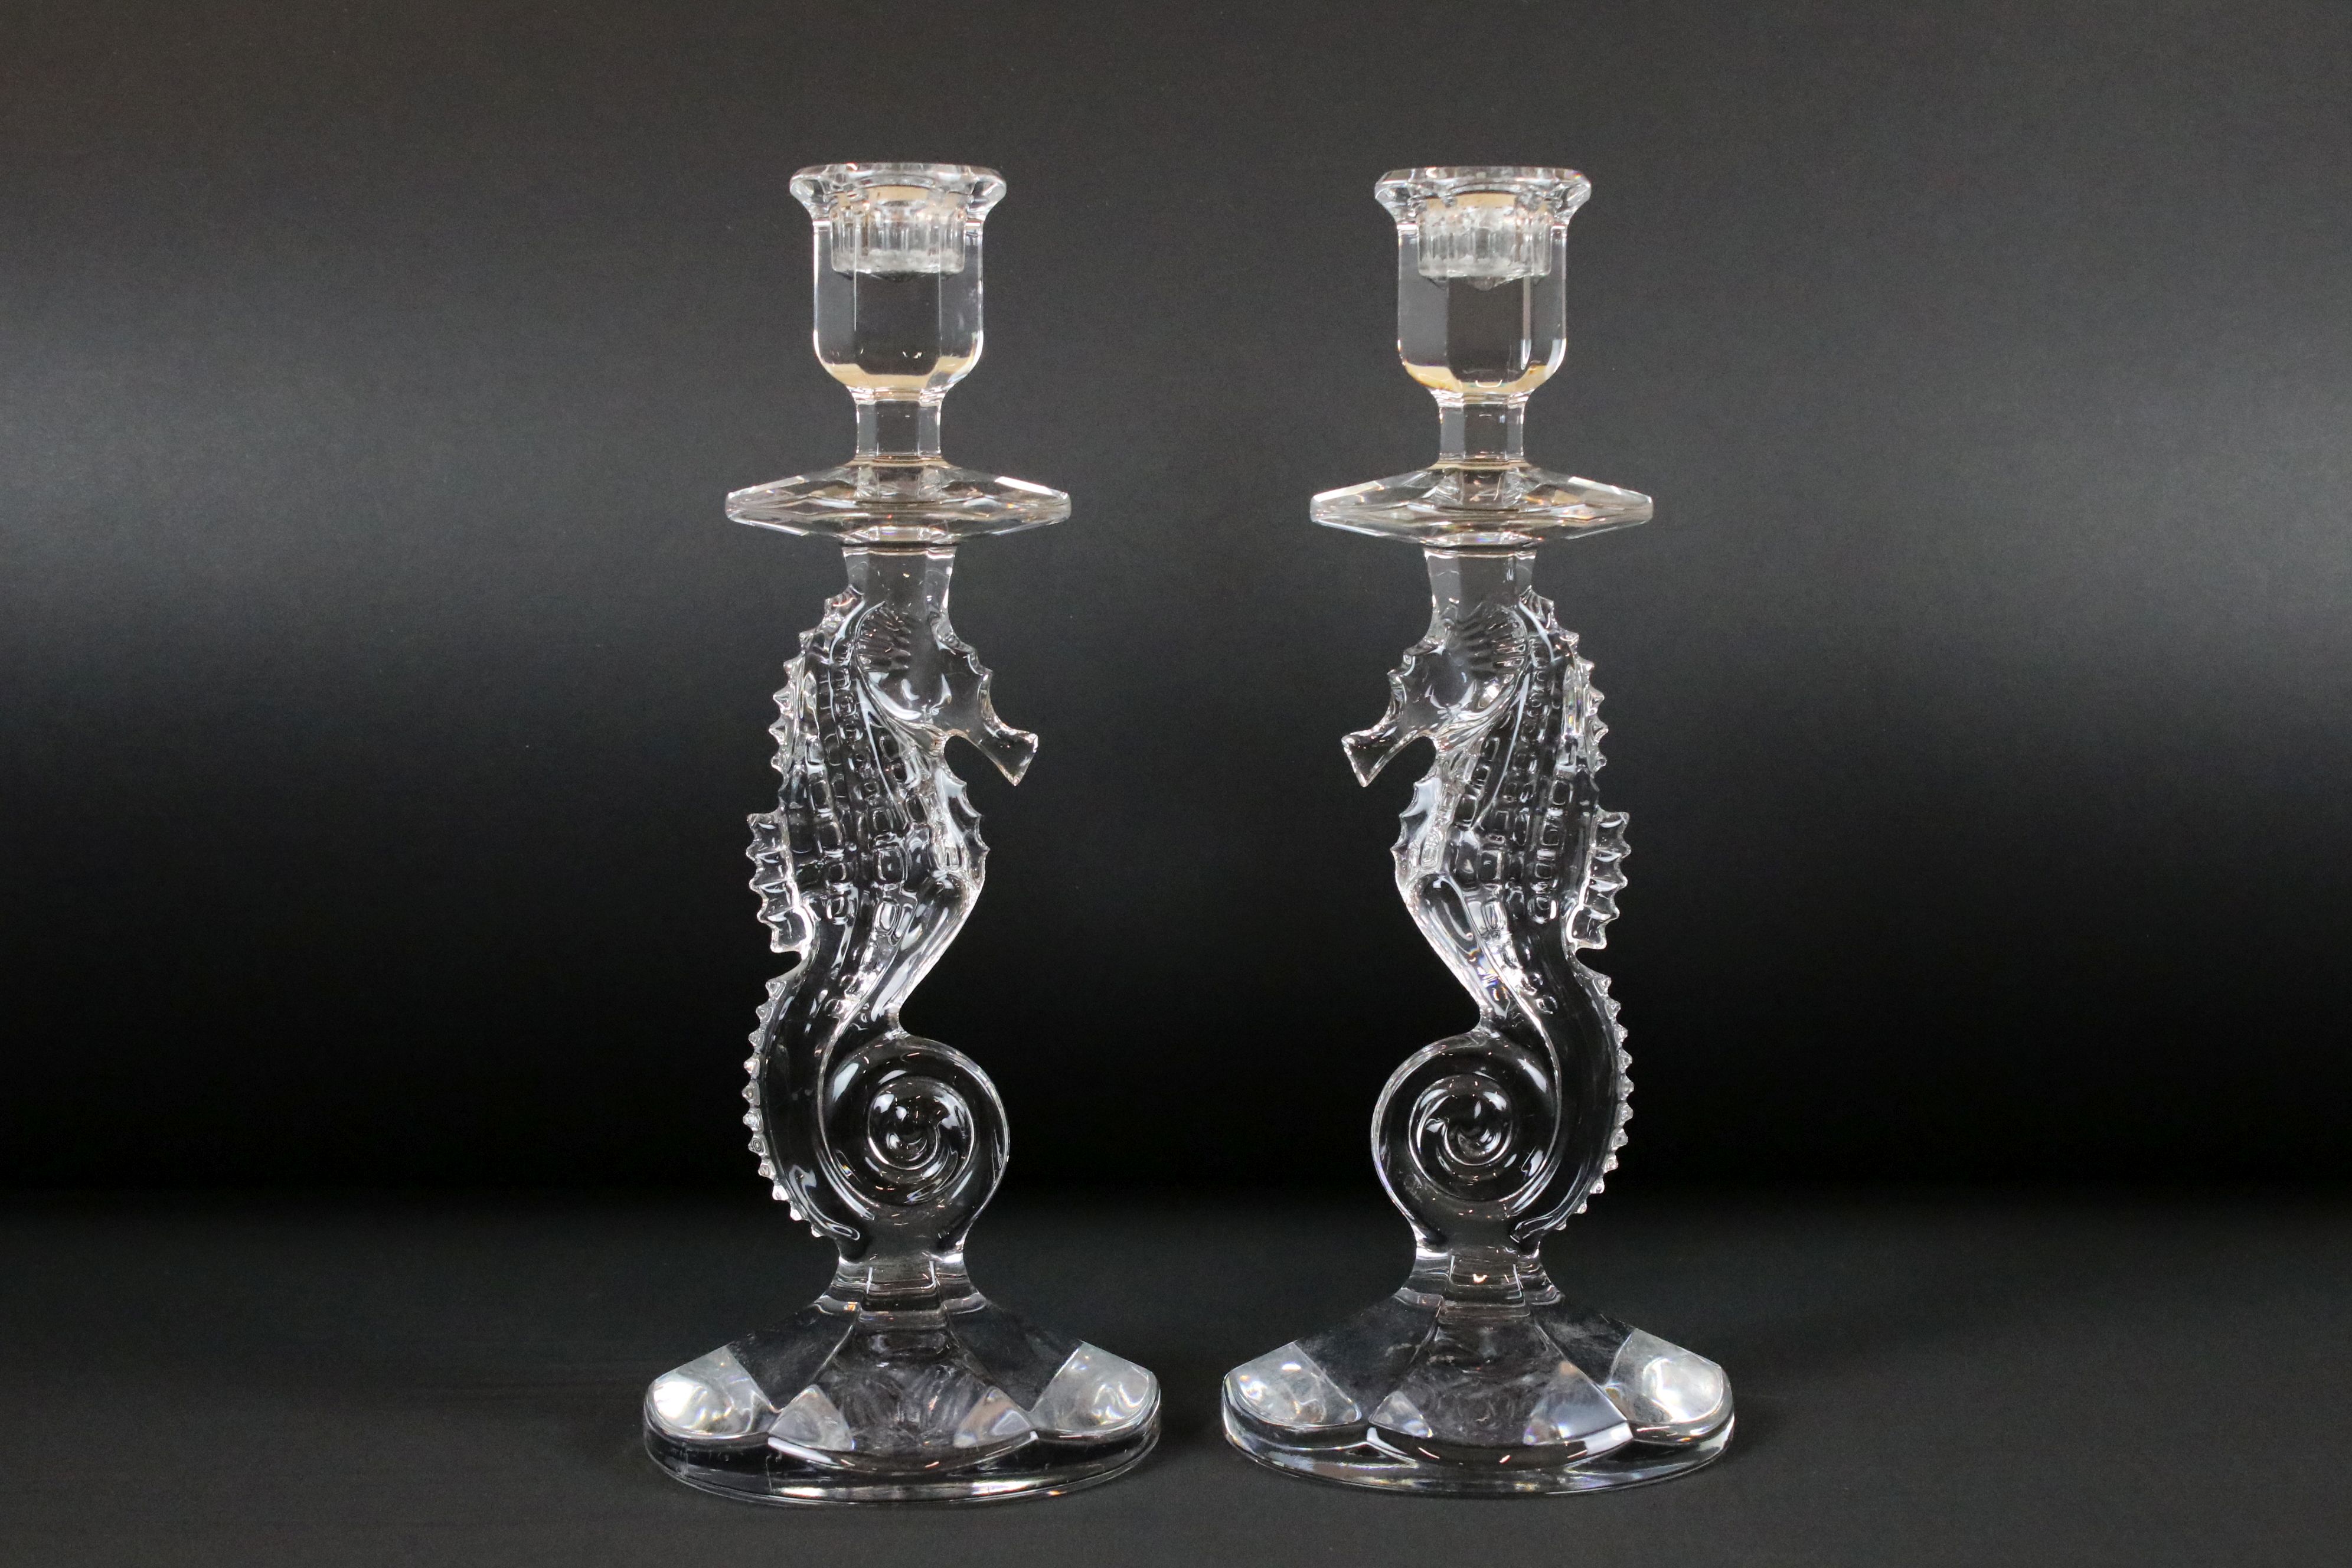 Pair of Waterford Crystal Glass Candlesticks in the form of Seahorses, etched marks to base, 29.